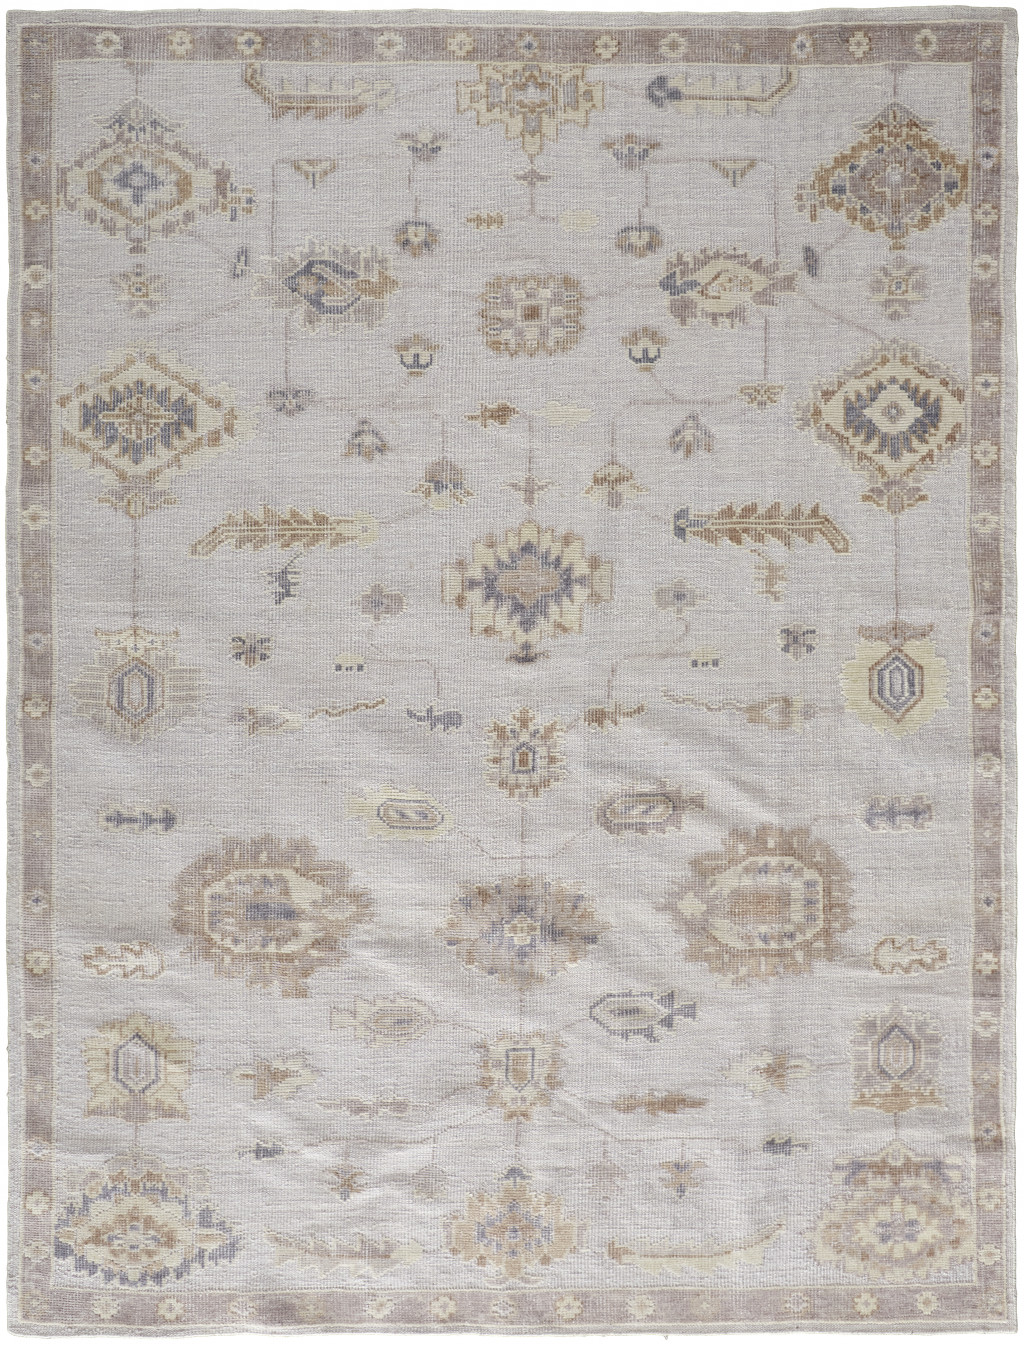 12' X 15' Ivory And Orange Floral Hand Knotted Stain Resistant Area Rug-514975-1